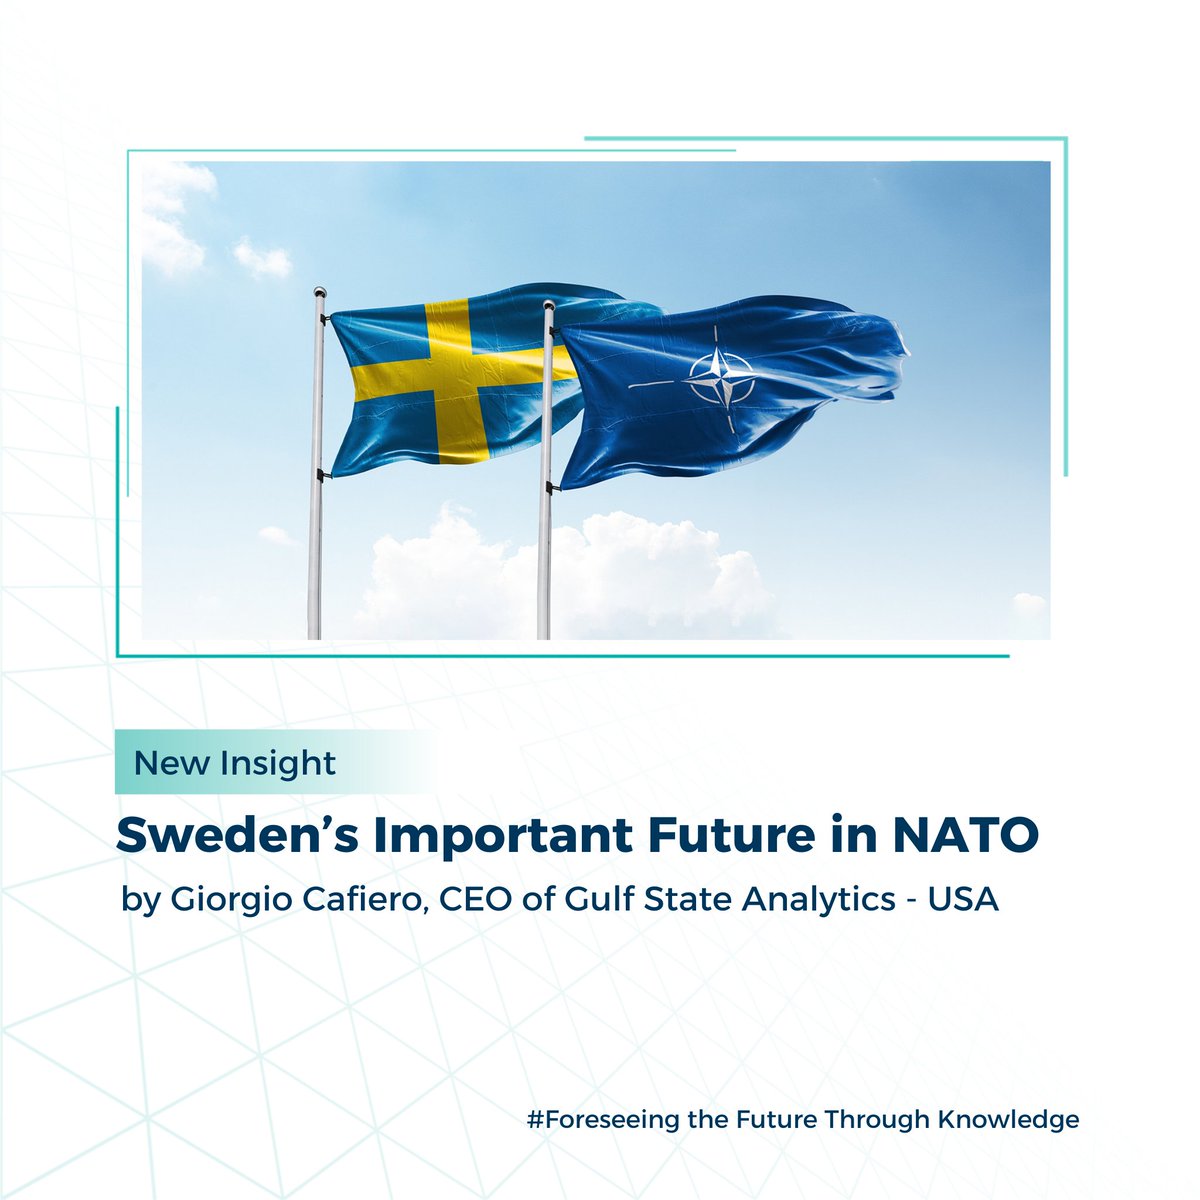 TRENDS has published a new insight entitled “Sweden’s Important Future in NATO” by Giorgio Cafiero, CEO of Gulf State Analytics - USA.

bit.ly/4dBe9O8

#TRENDS #NATO #Geopolitics #InternationalRelations #ForeignPolicy #Sweden #GlobalAffairs

@GiorgioCafiero